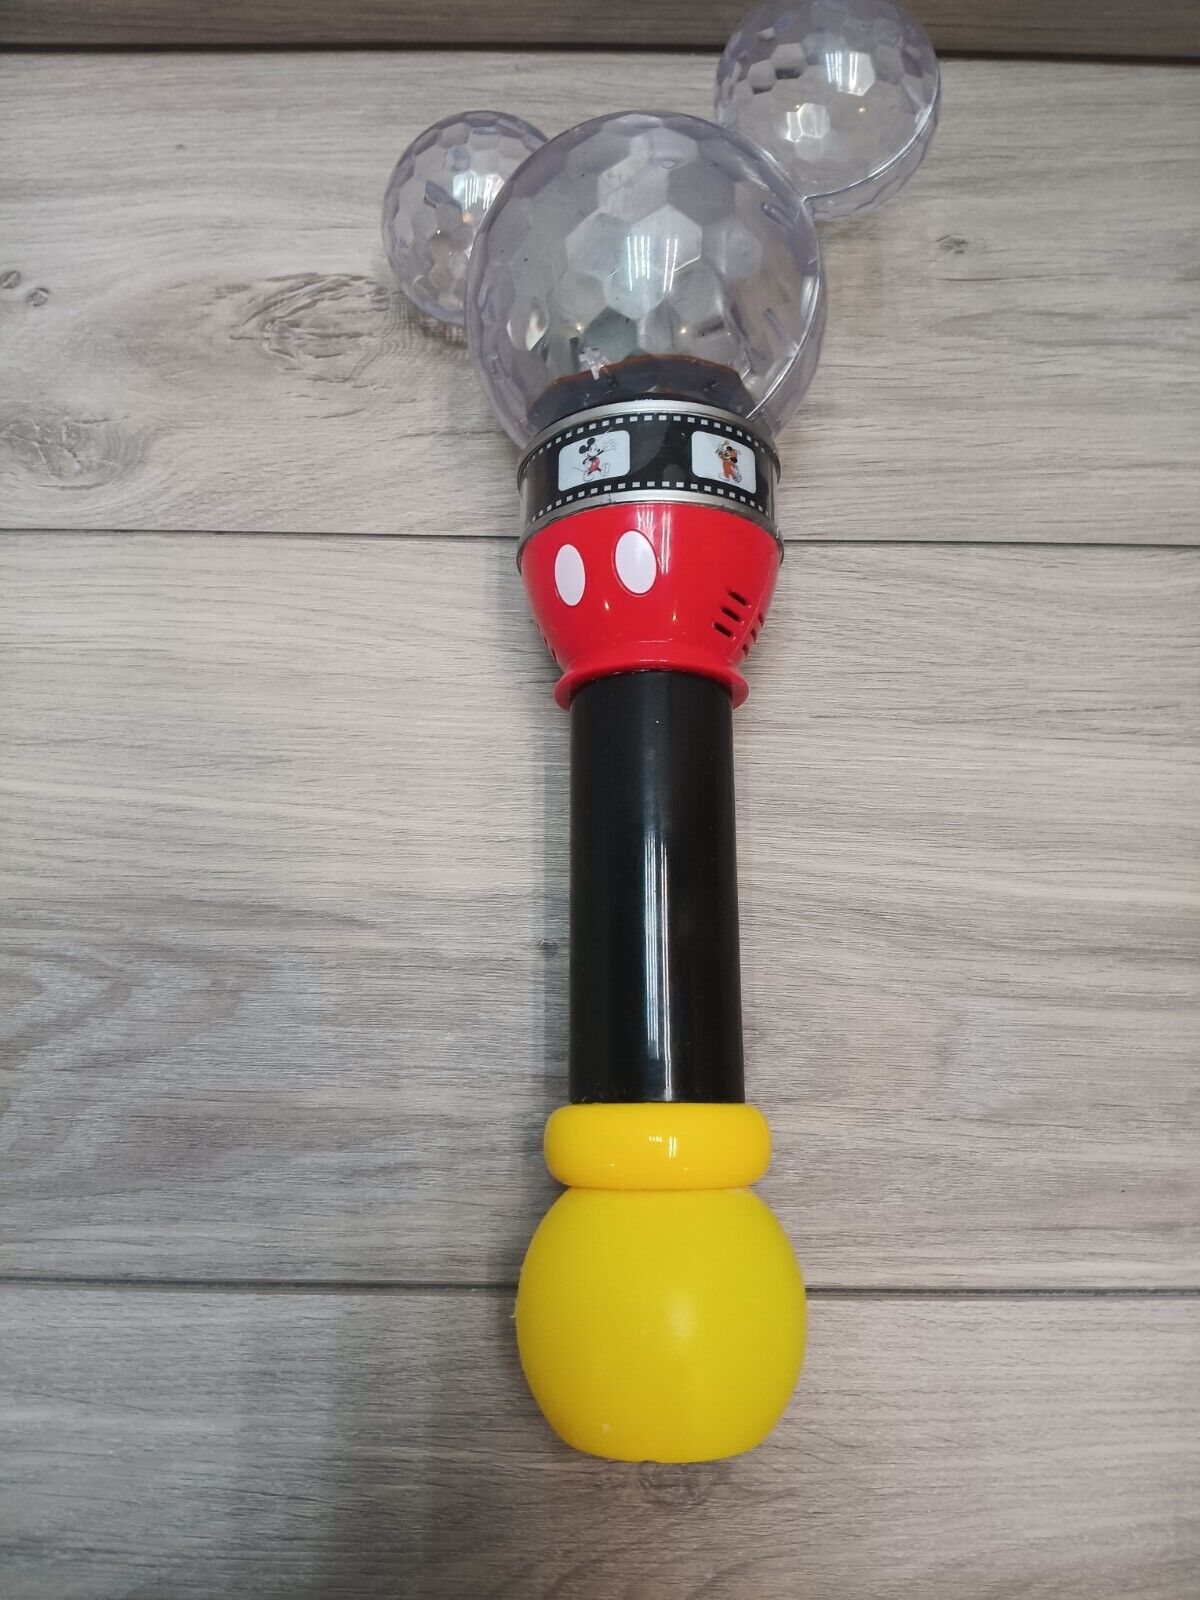 Disneyland Mickey Mouse Film Strip Light Up Bubble Wand Tested Sound And Bubbles